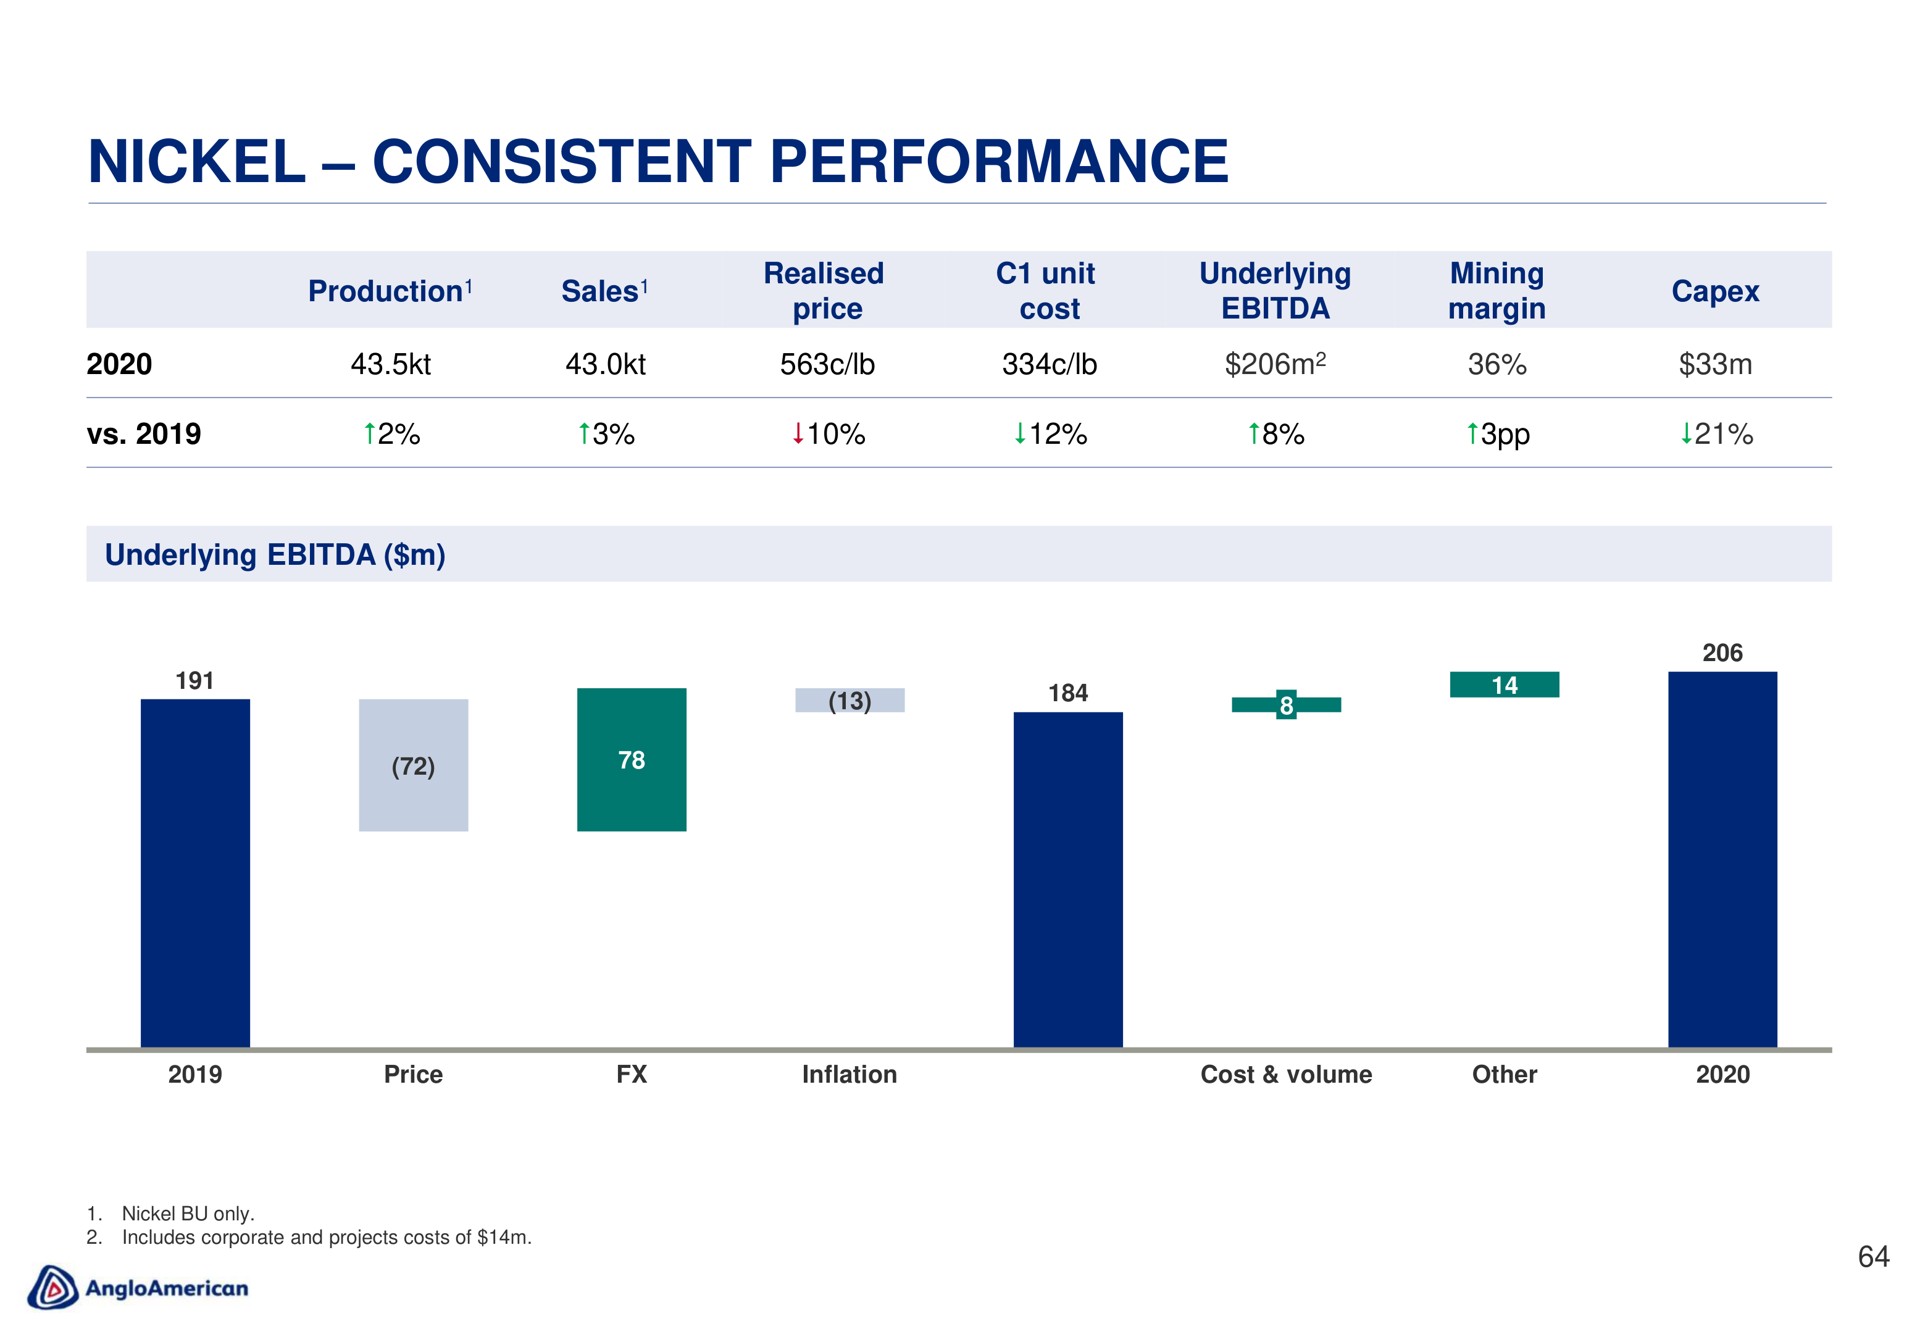 nickel consistent performance | AngloAmerican